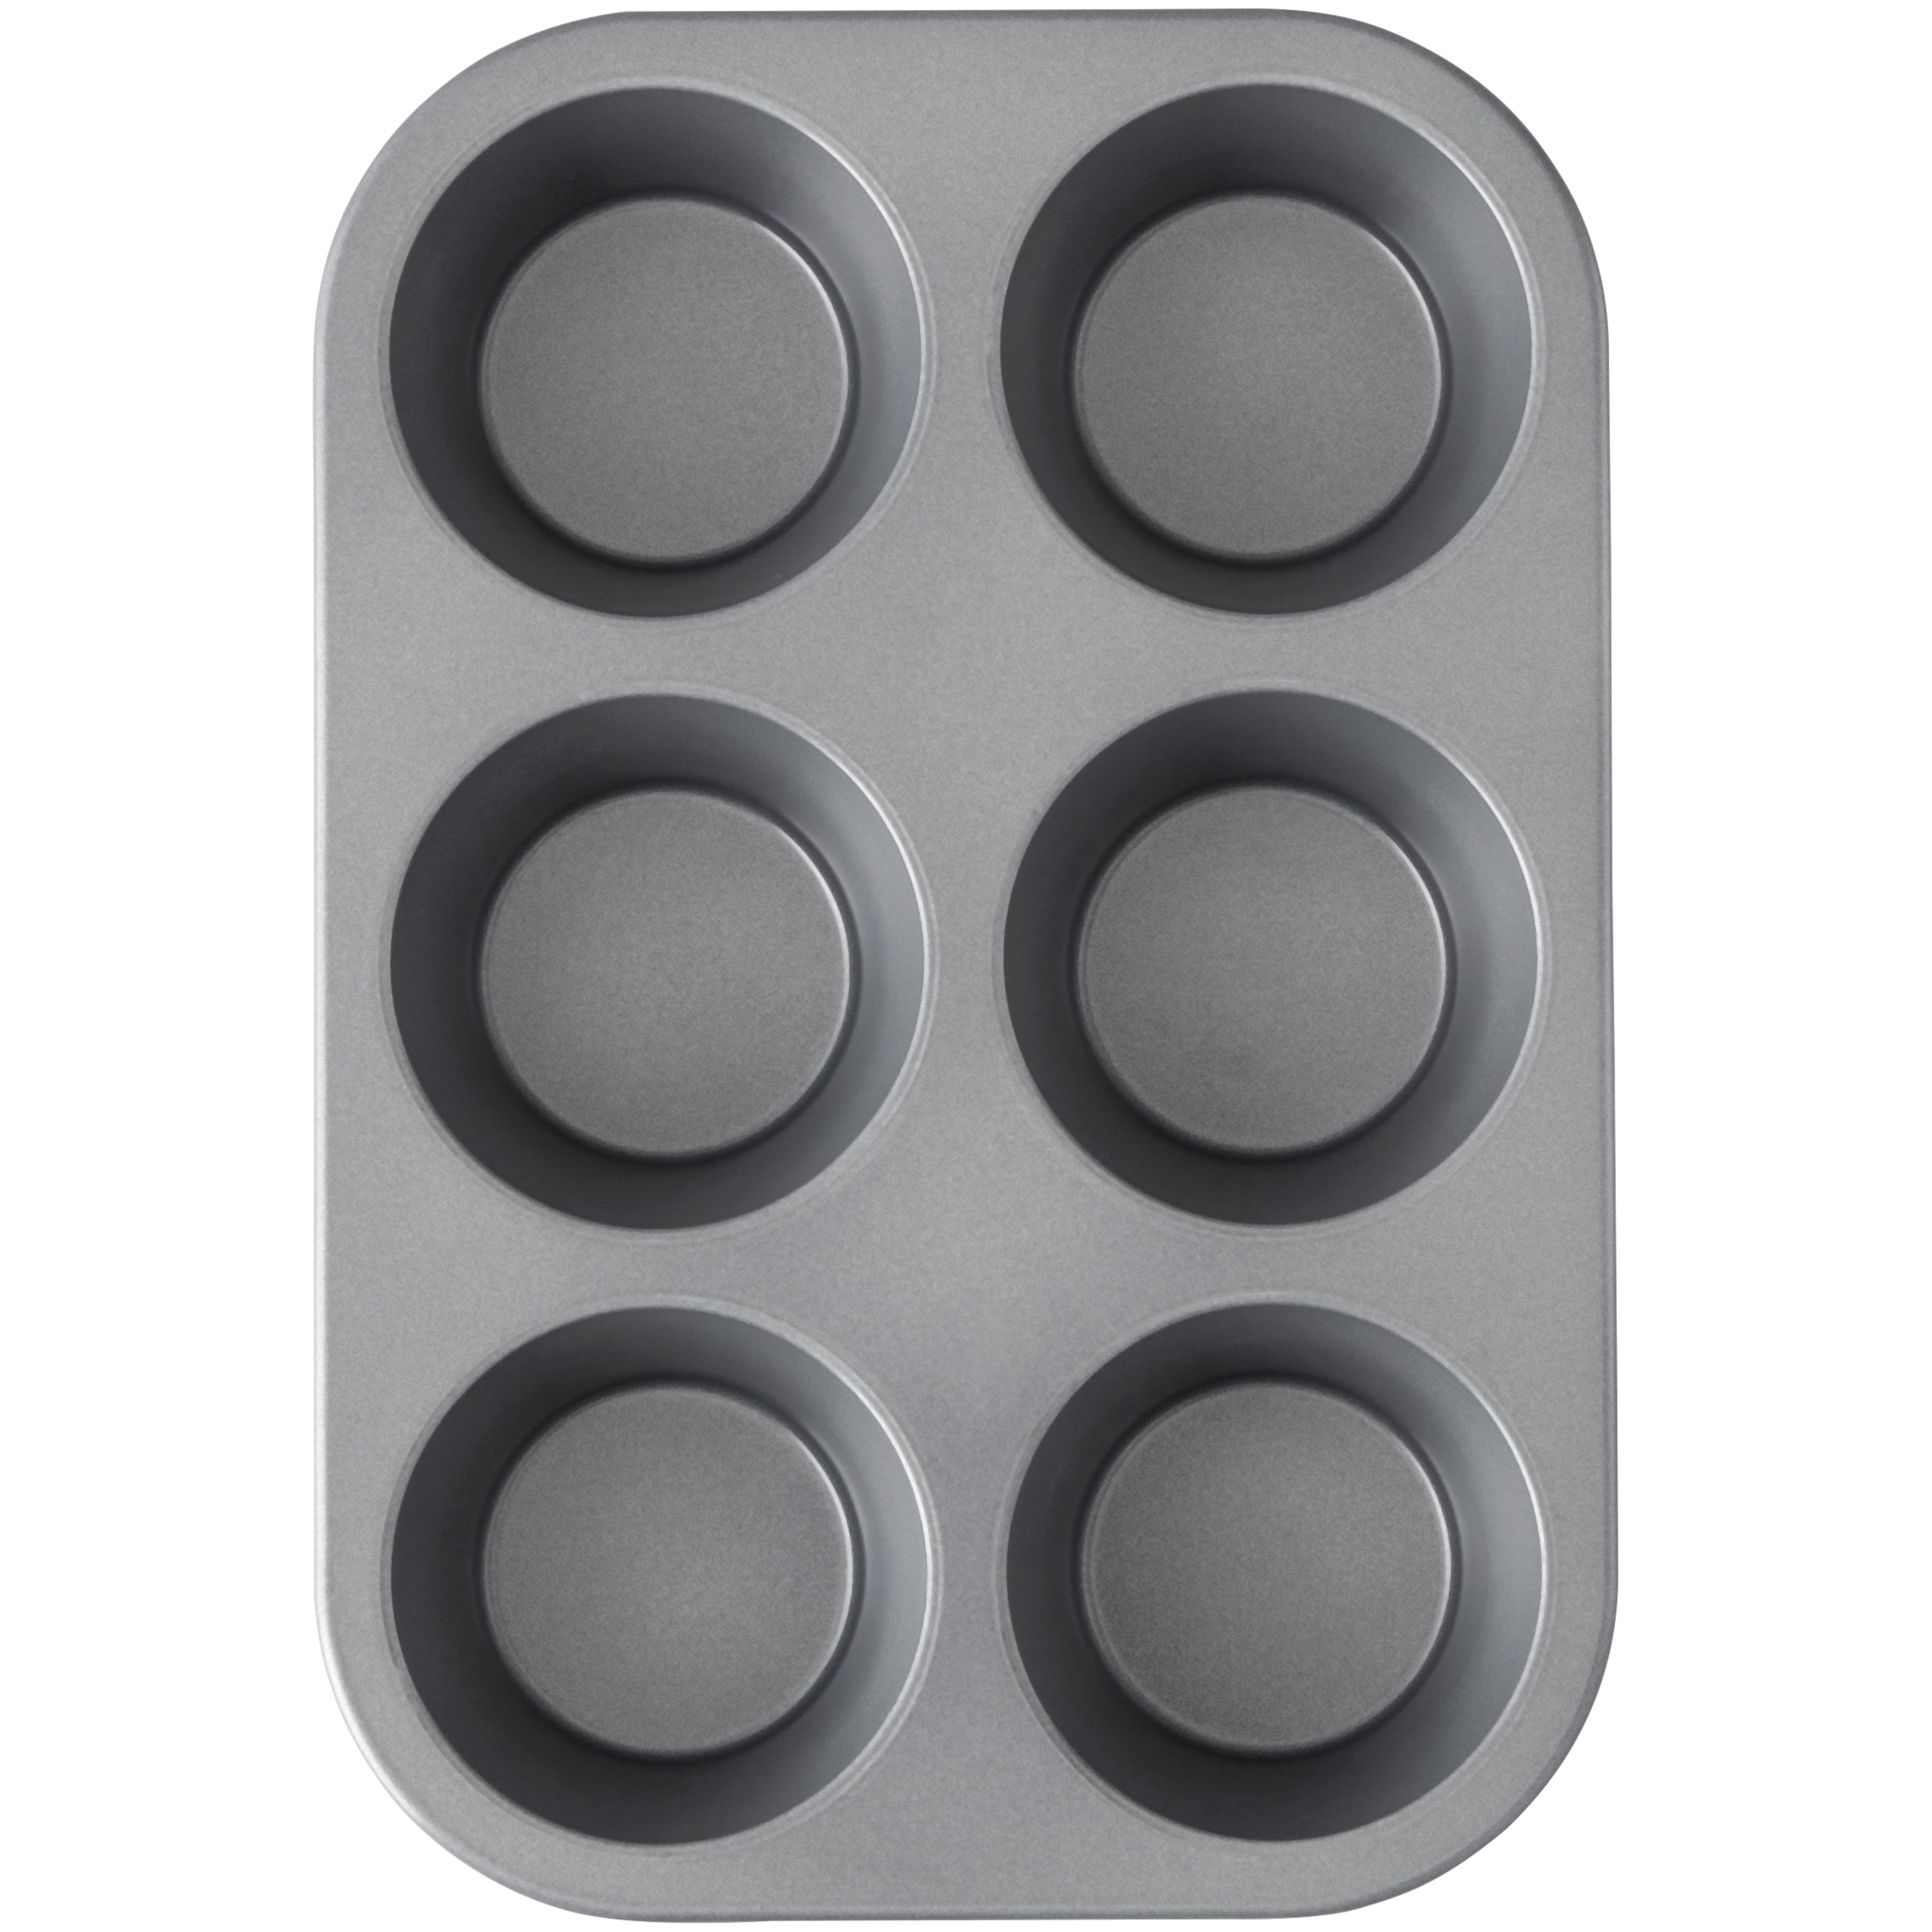 Premium Non-Stick 12 Cup Muffin Pan w/ Cover Details about   Wilton 2ct 